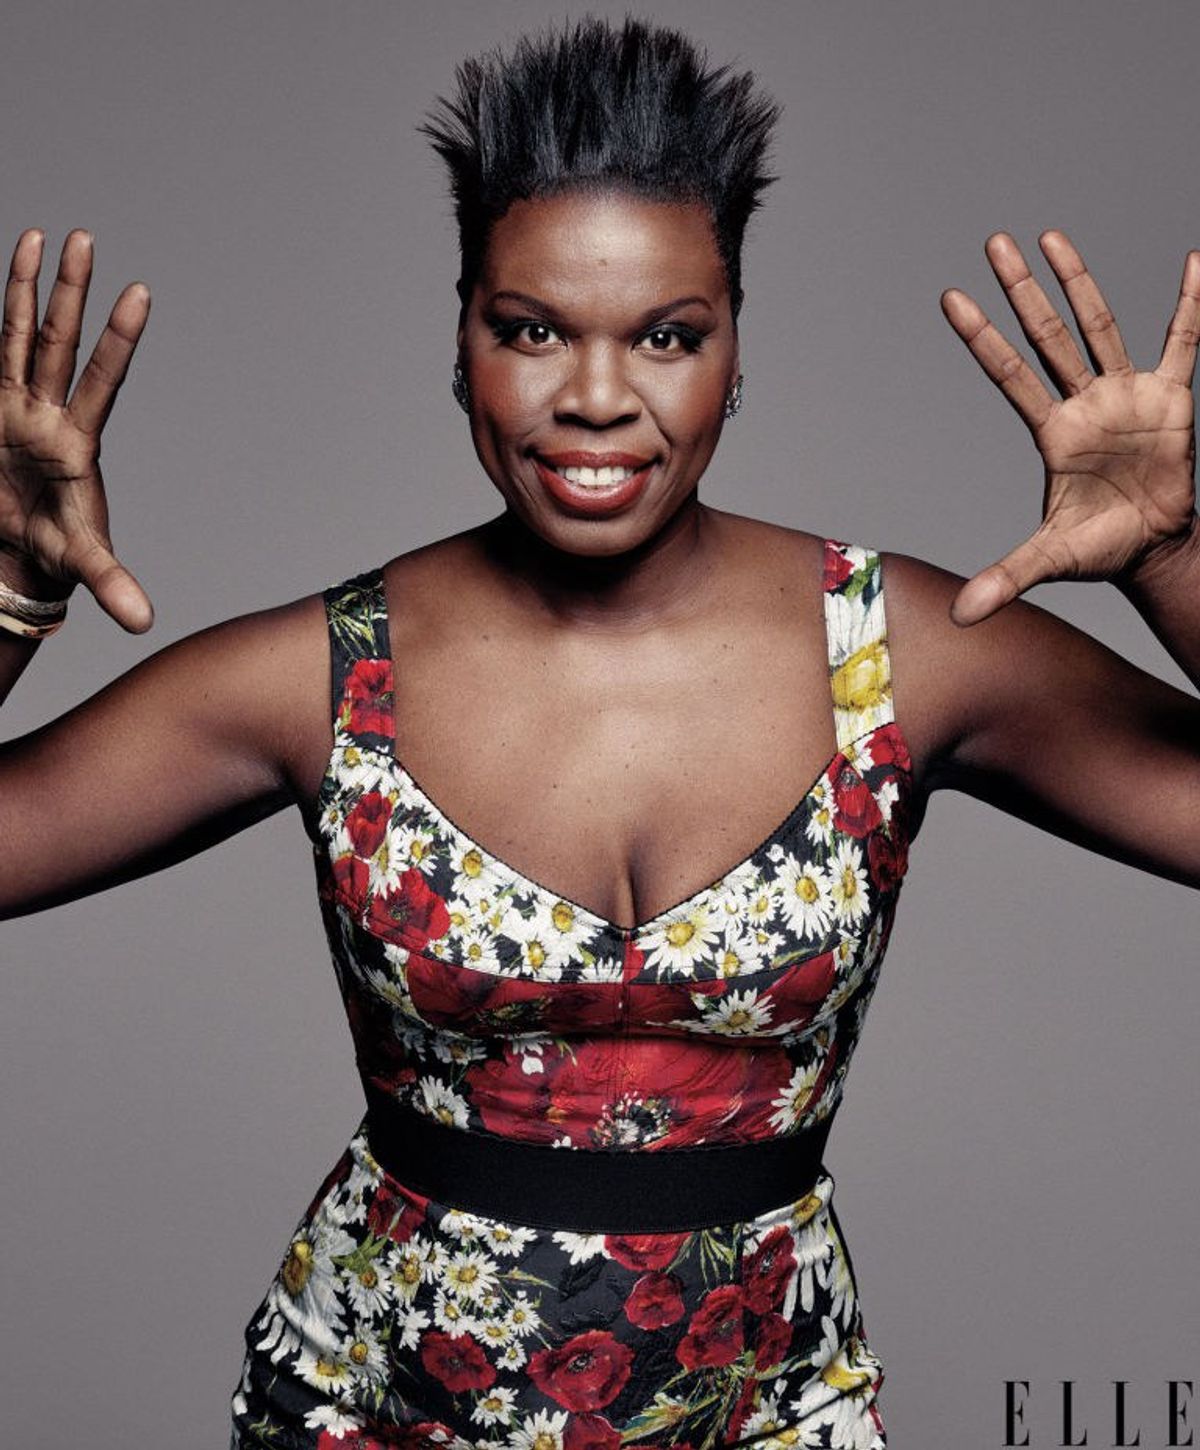 A Thank You Letter To Ms. Leslie Jones